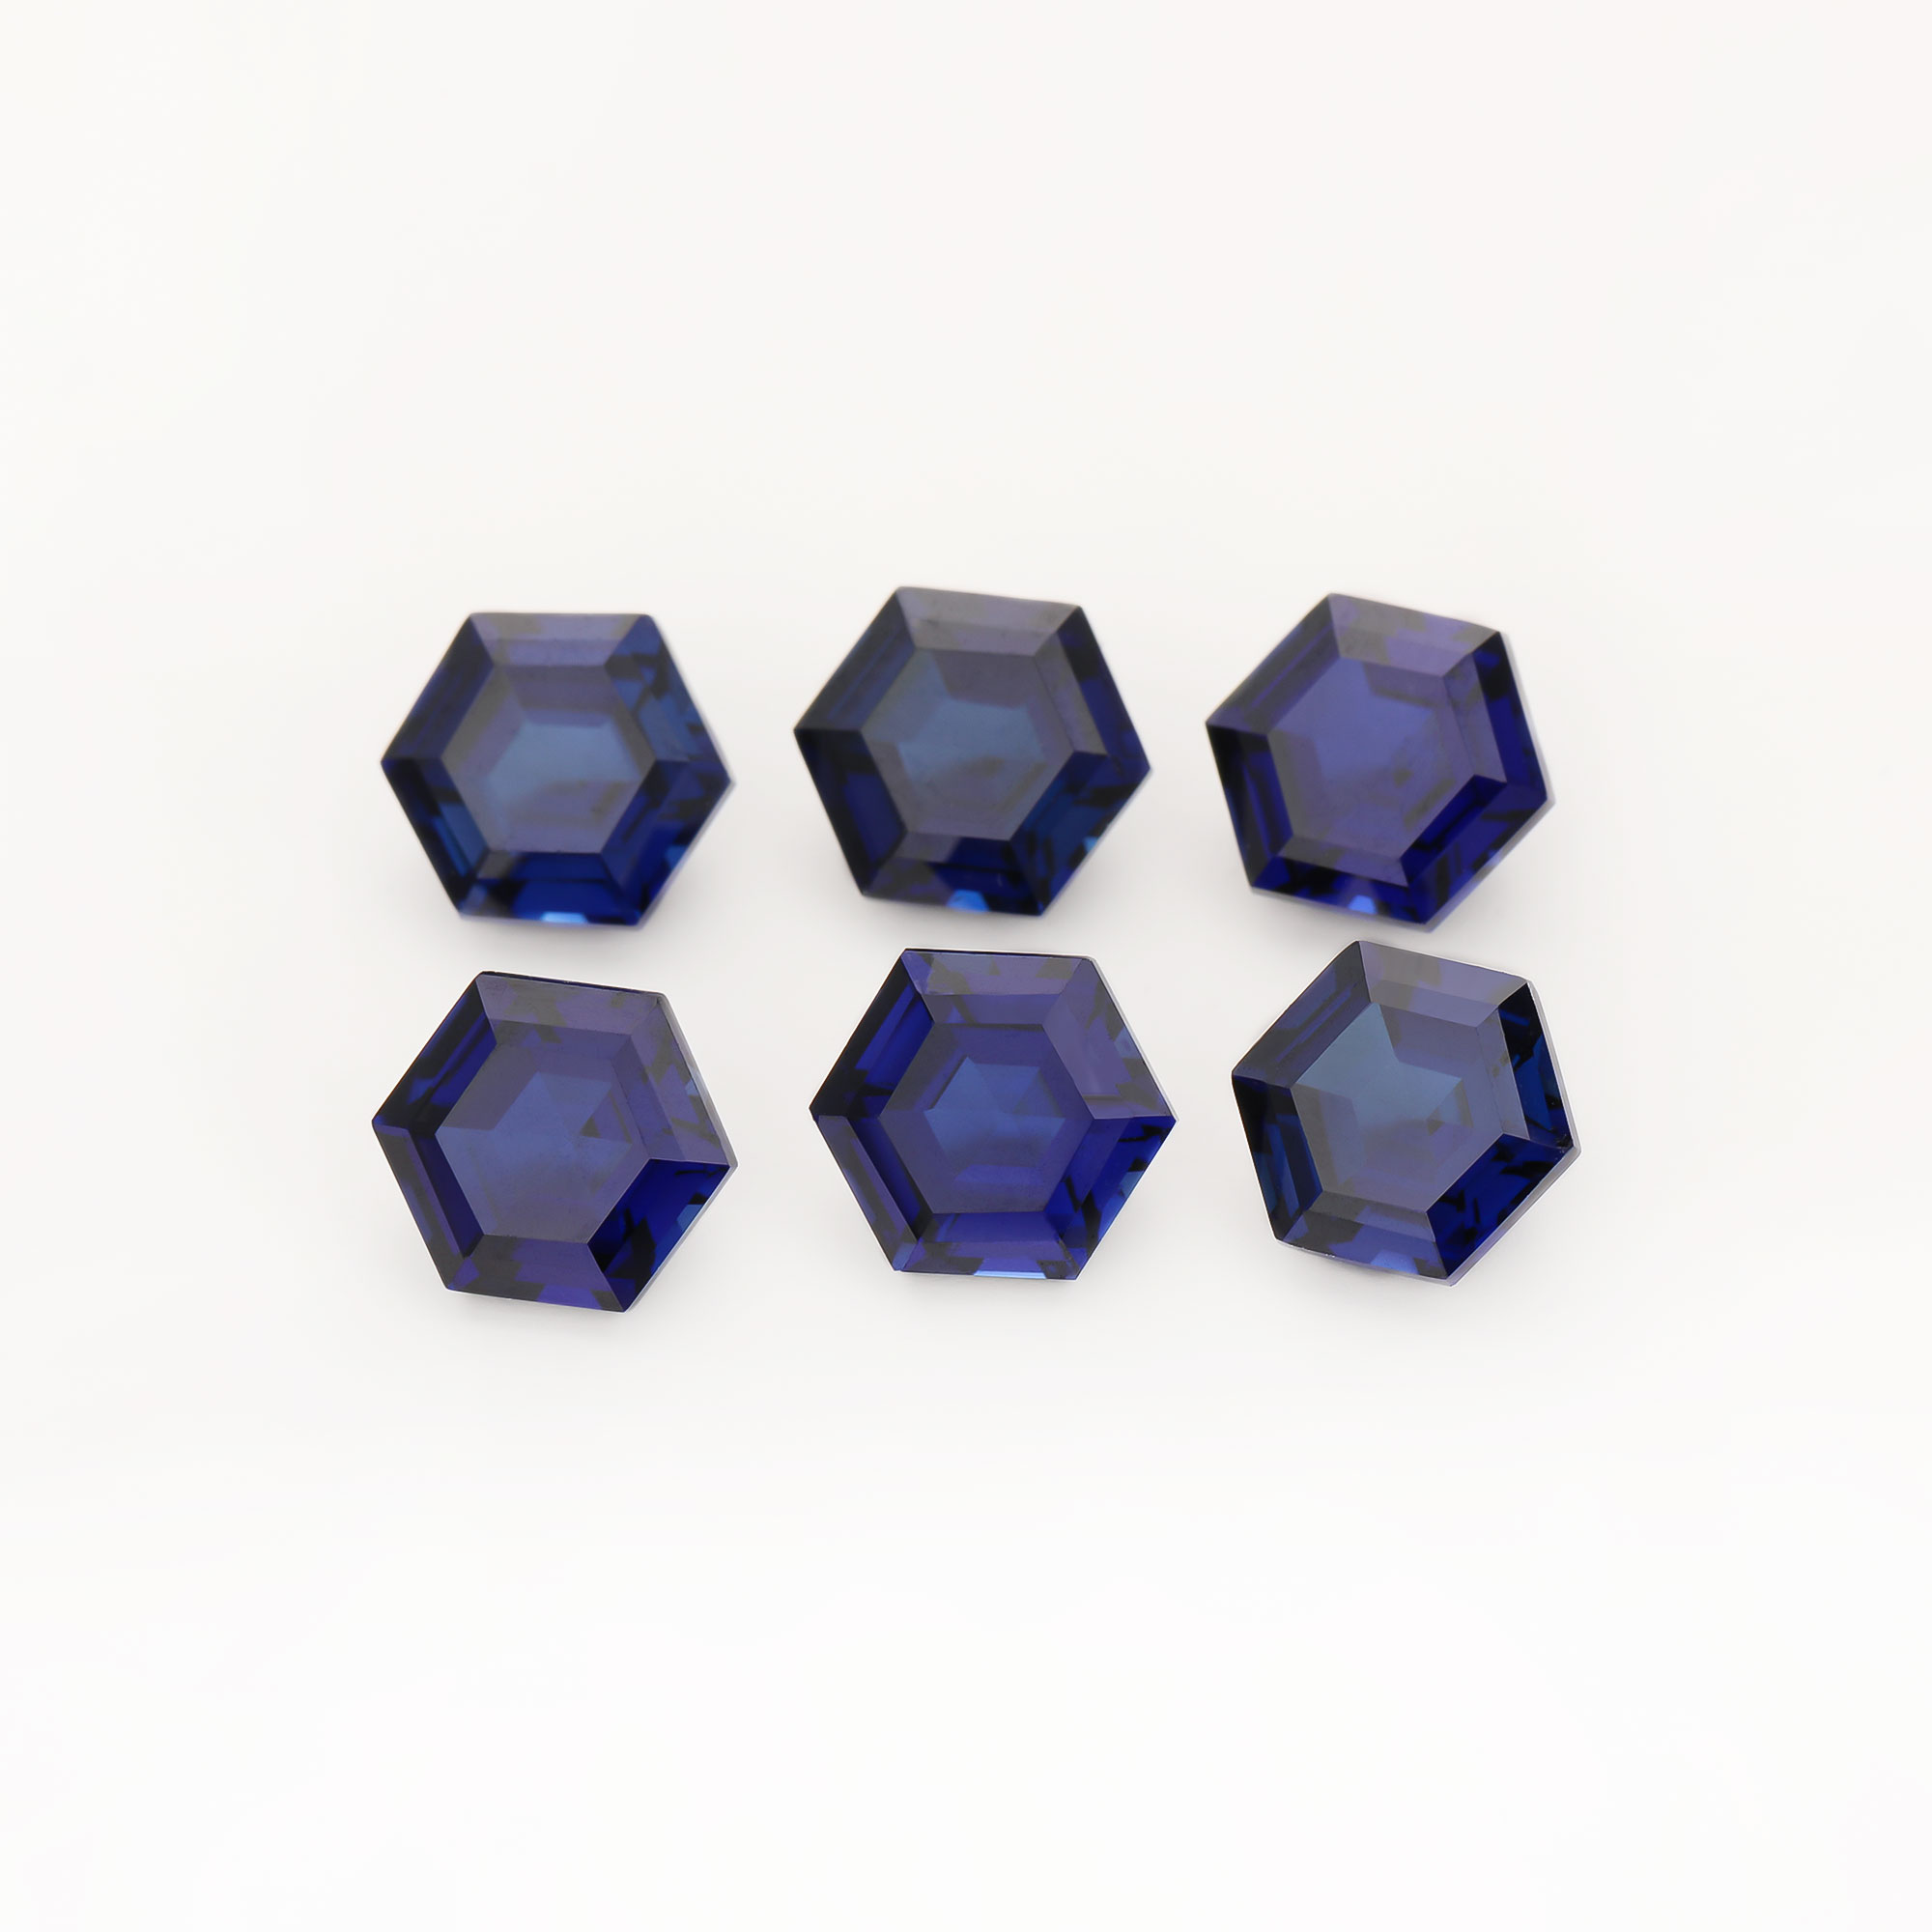 1Pcs Hexagon Cut Sapphire Faceted Stone Lab Created,September Birthstone,Deep Blue Faceted Loose Gemstone,DIY Jewelry Supplies 4160062 - Click Image to Close